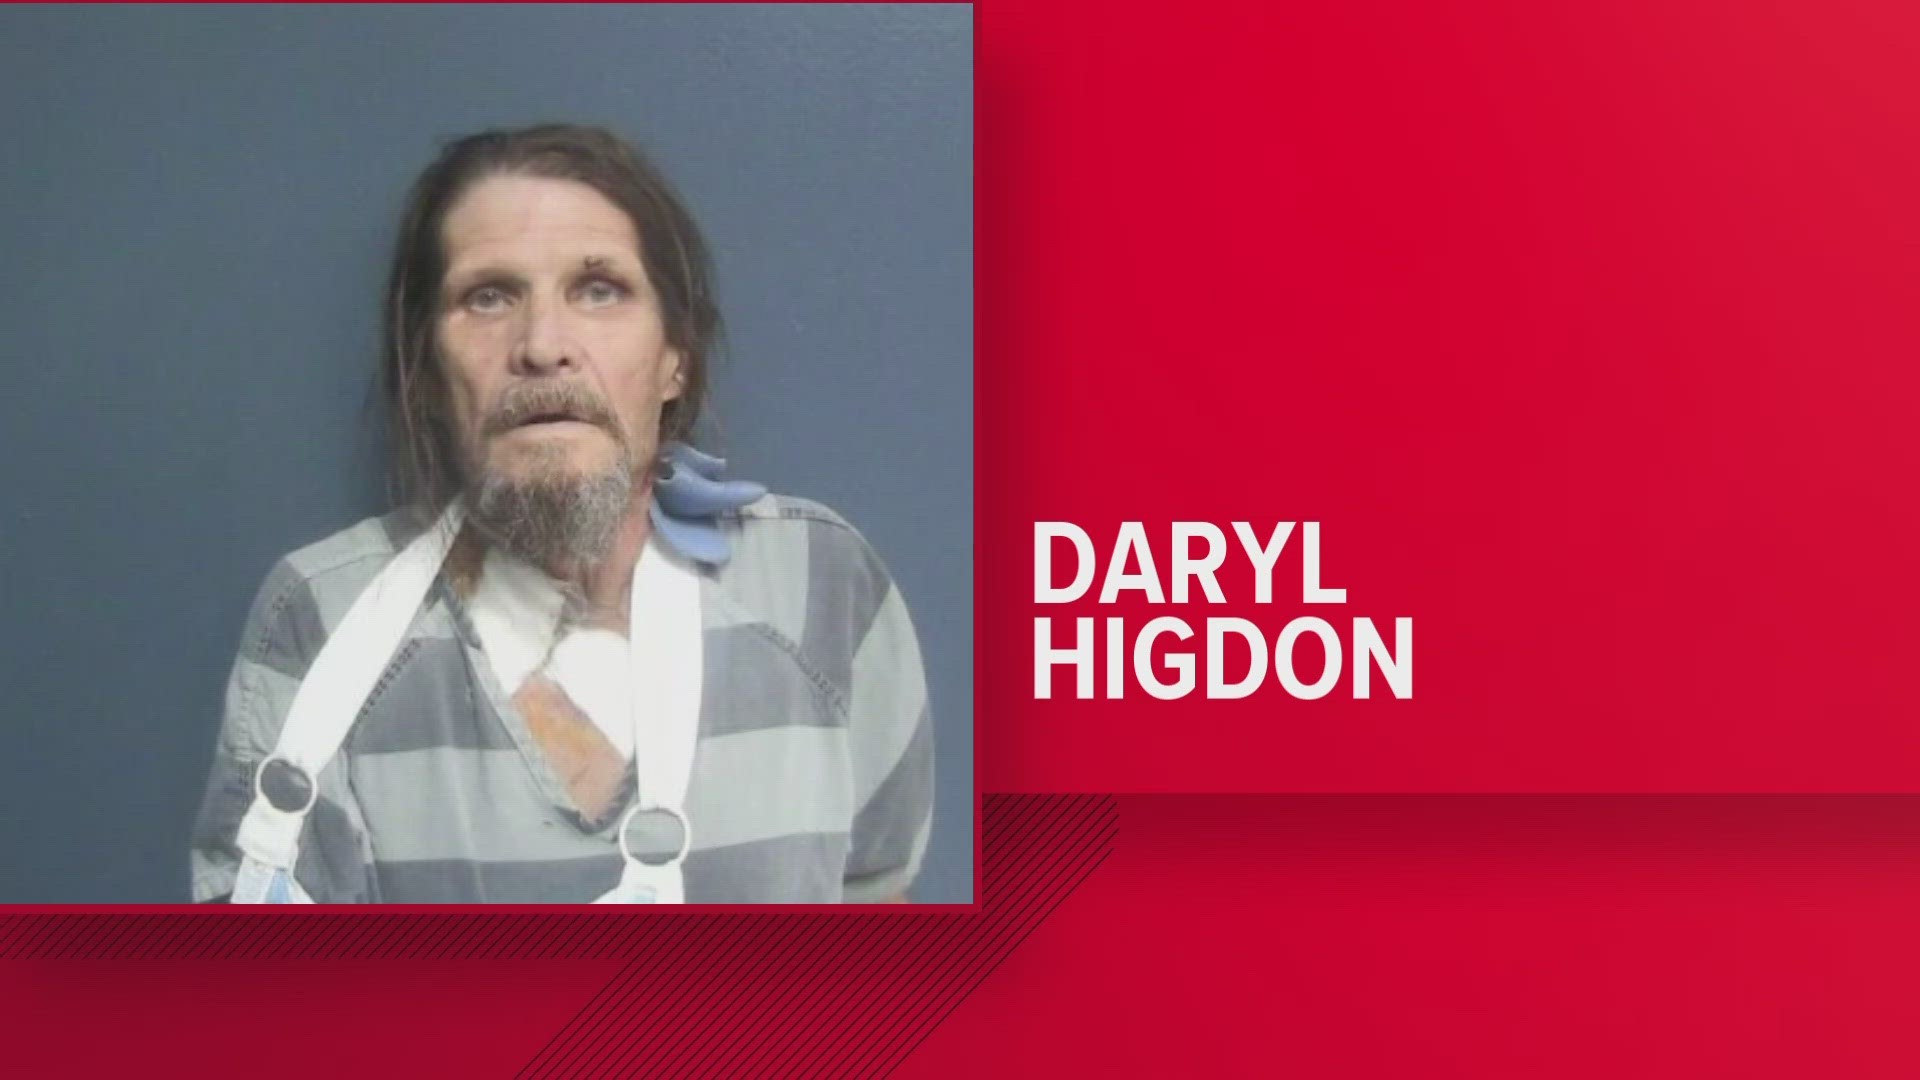 He is accused of shooting at police officers Friday night with an AR-15 rifle, according to Sevier County authorities.